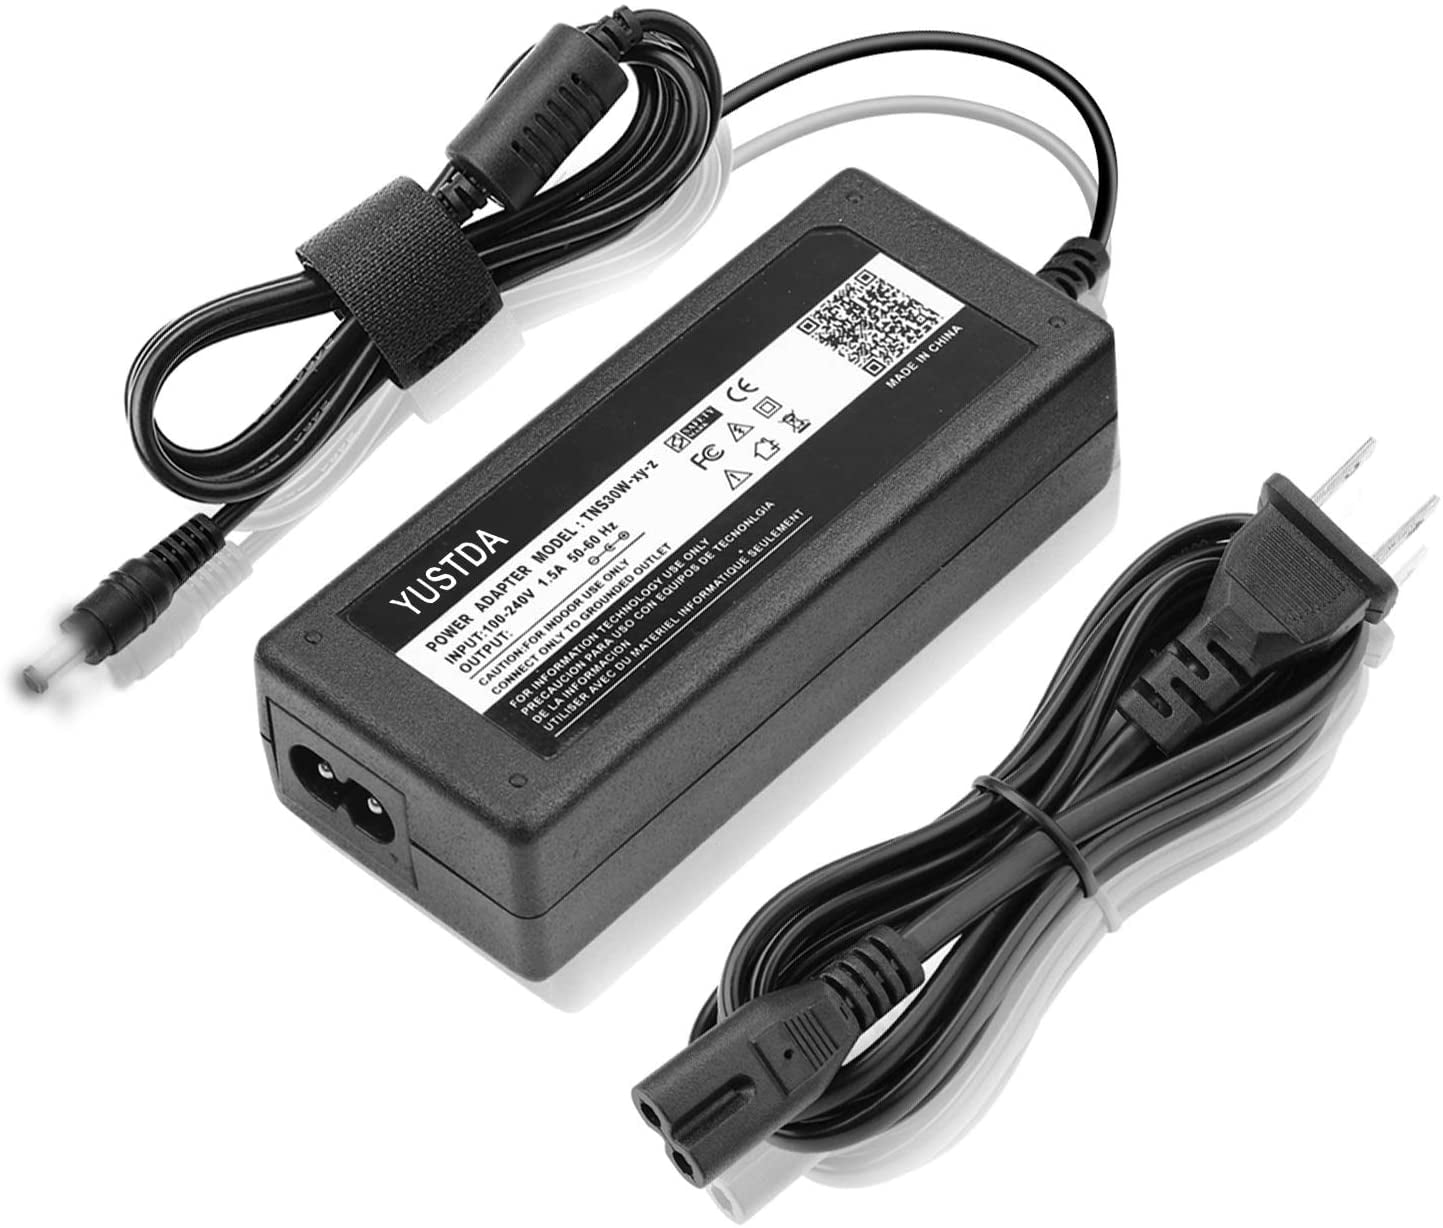 NEW 24V AC Adapter For Vizio YJS05-2402500D Sound Bar Power Supply Cord Charger 